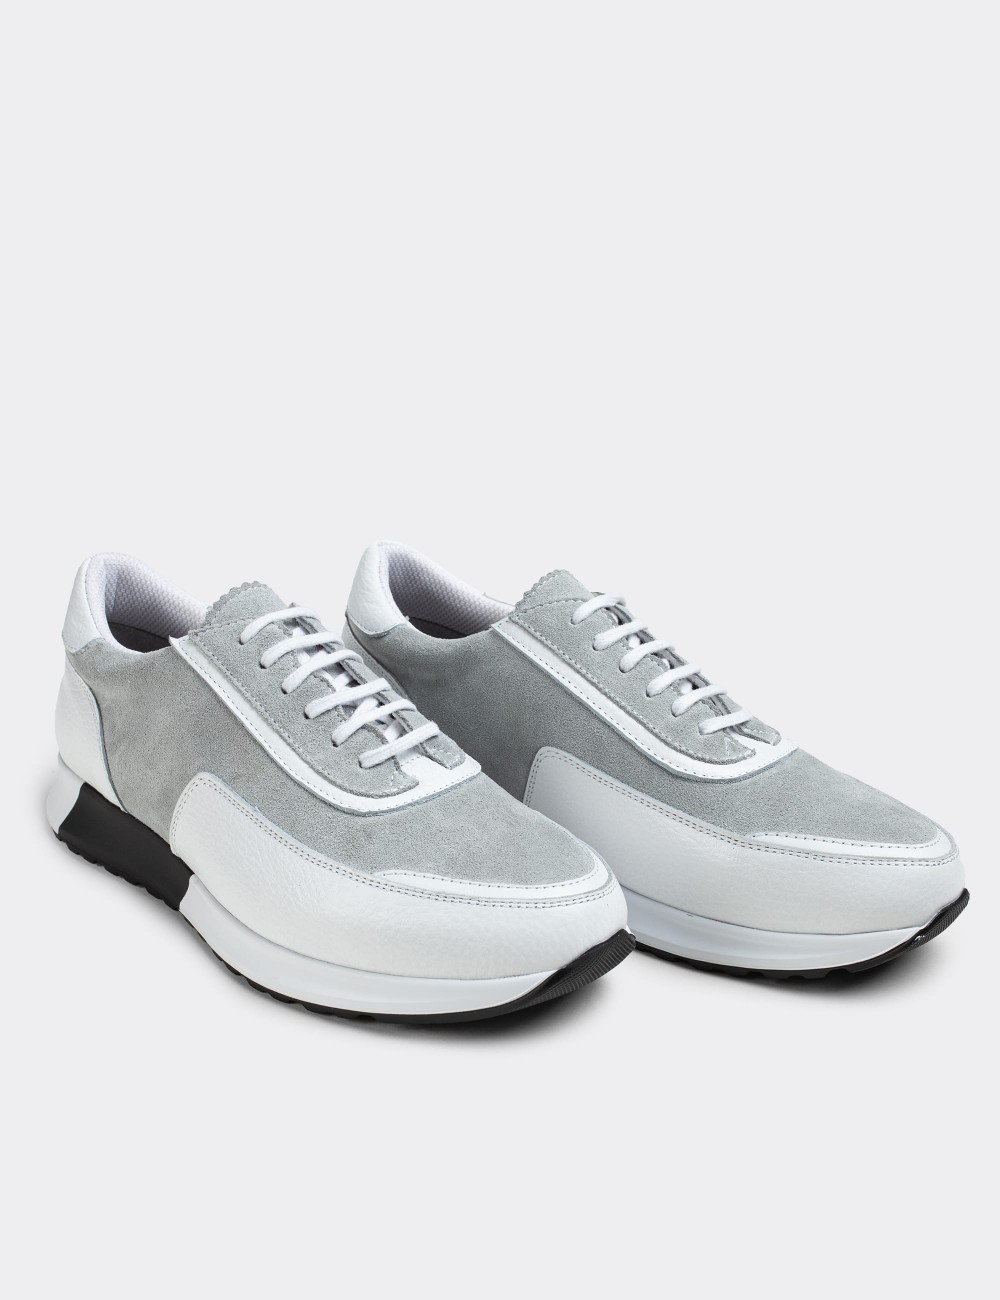 White Suede Leather Sneakers - 01819MBYZE01